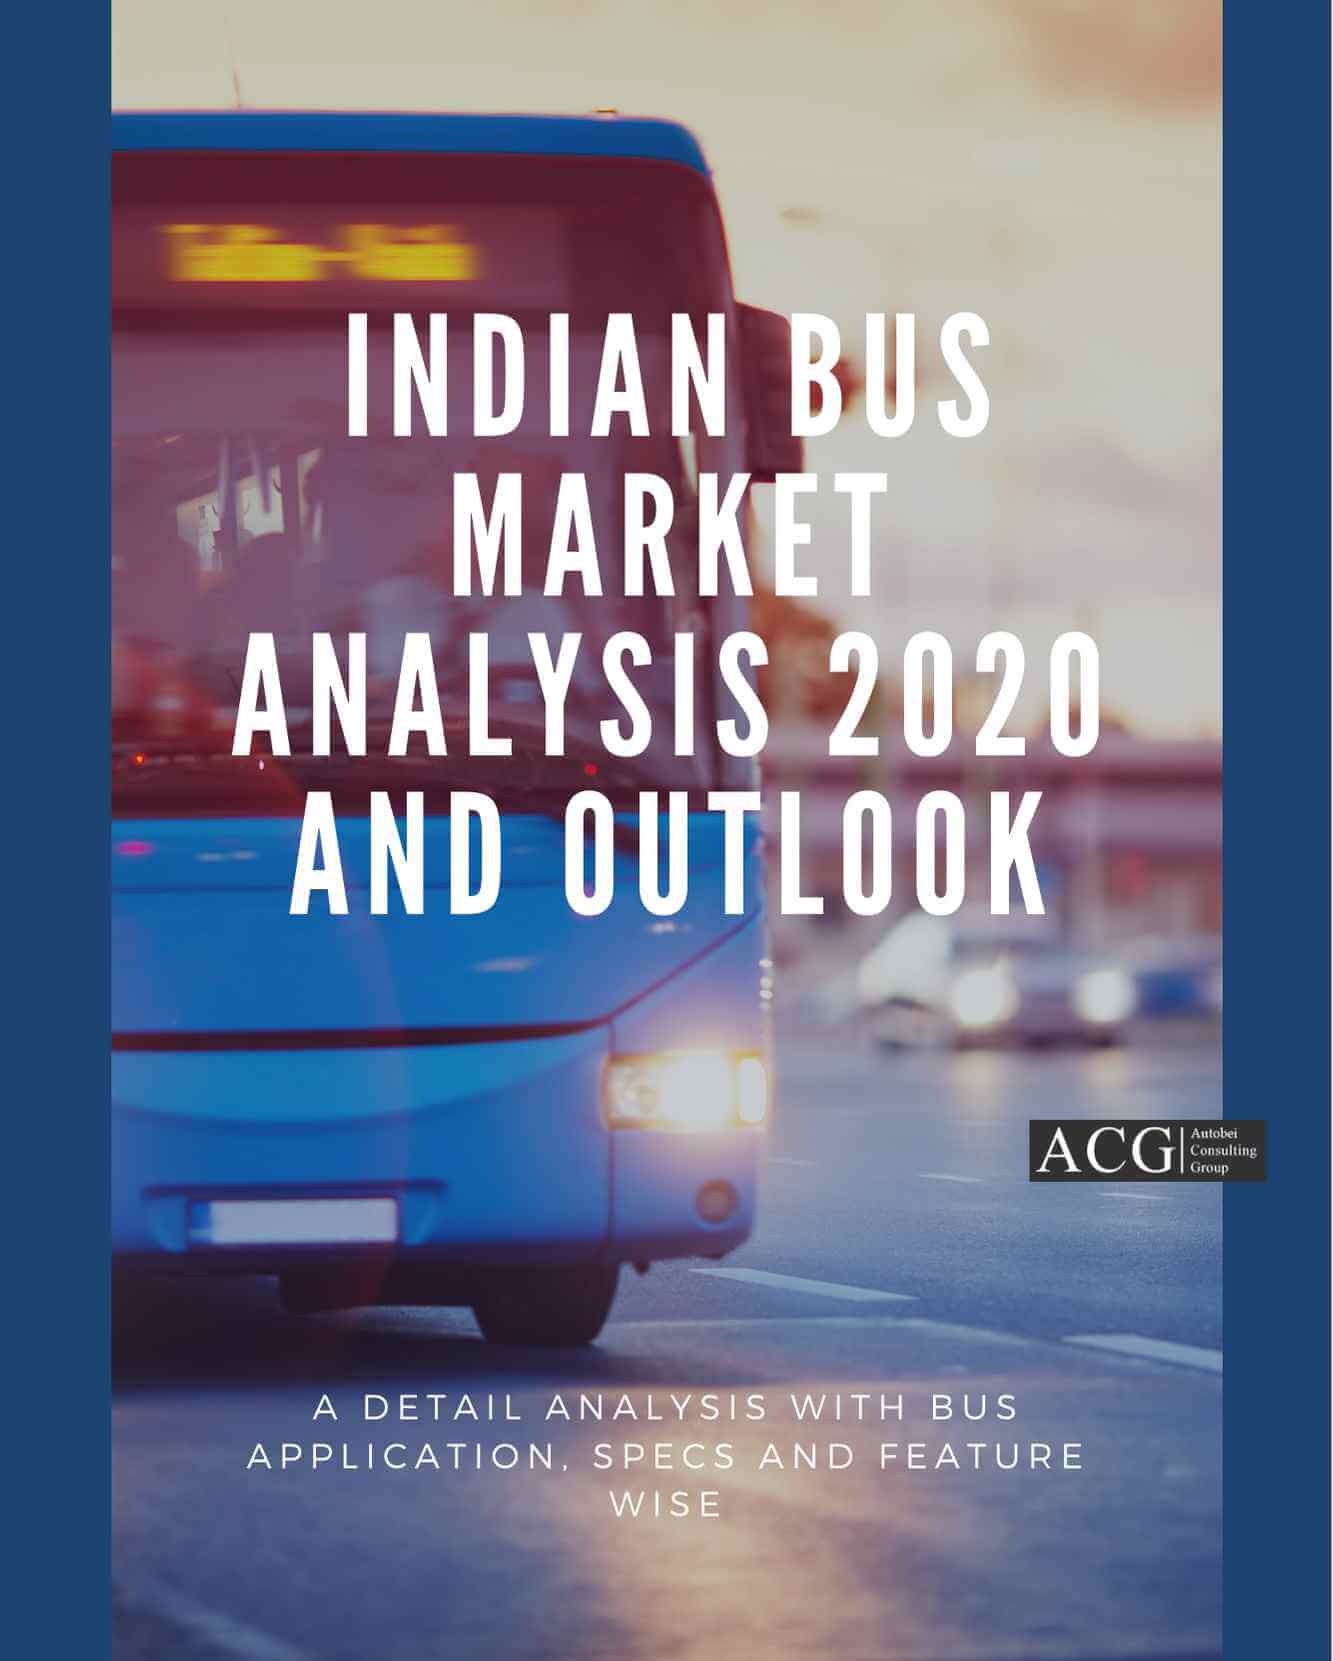 Indian Bus market Analysis 2020 and Outlook